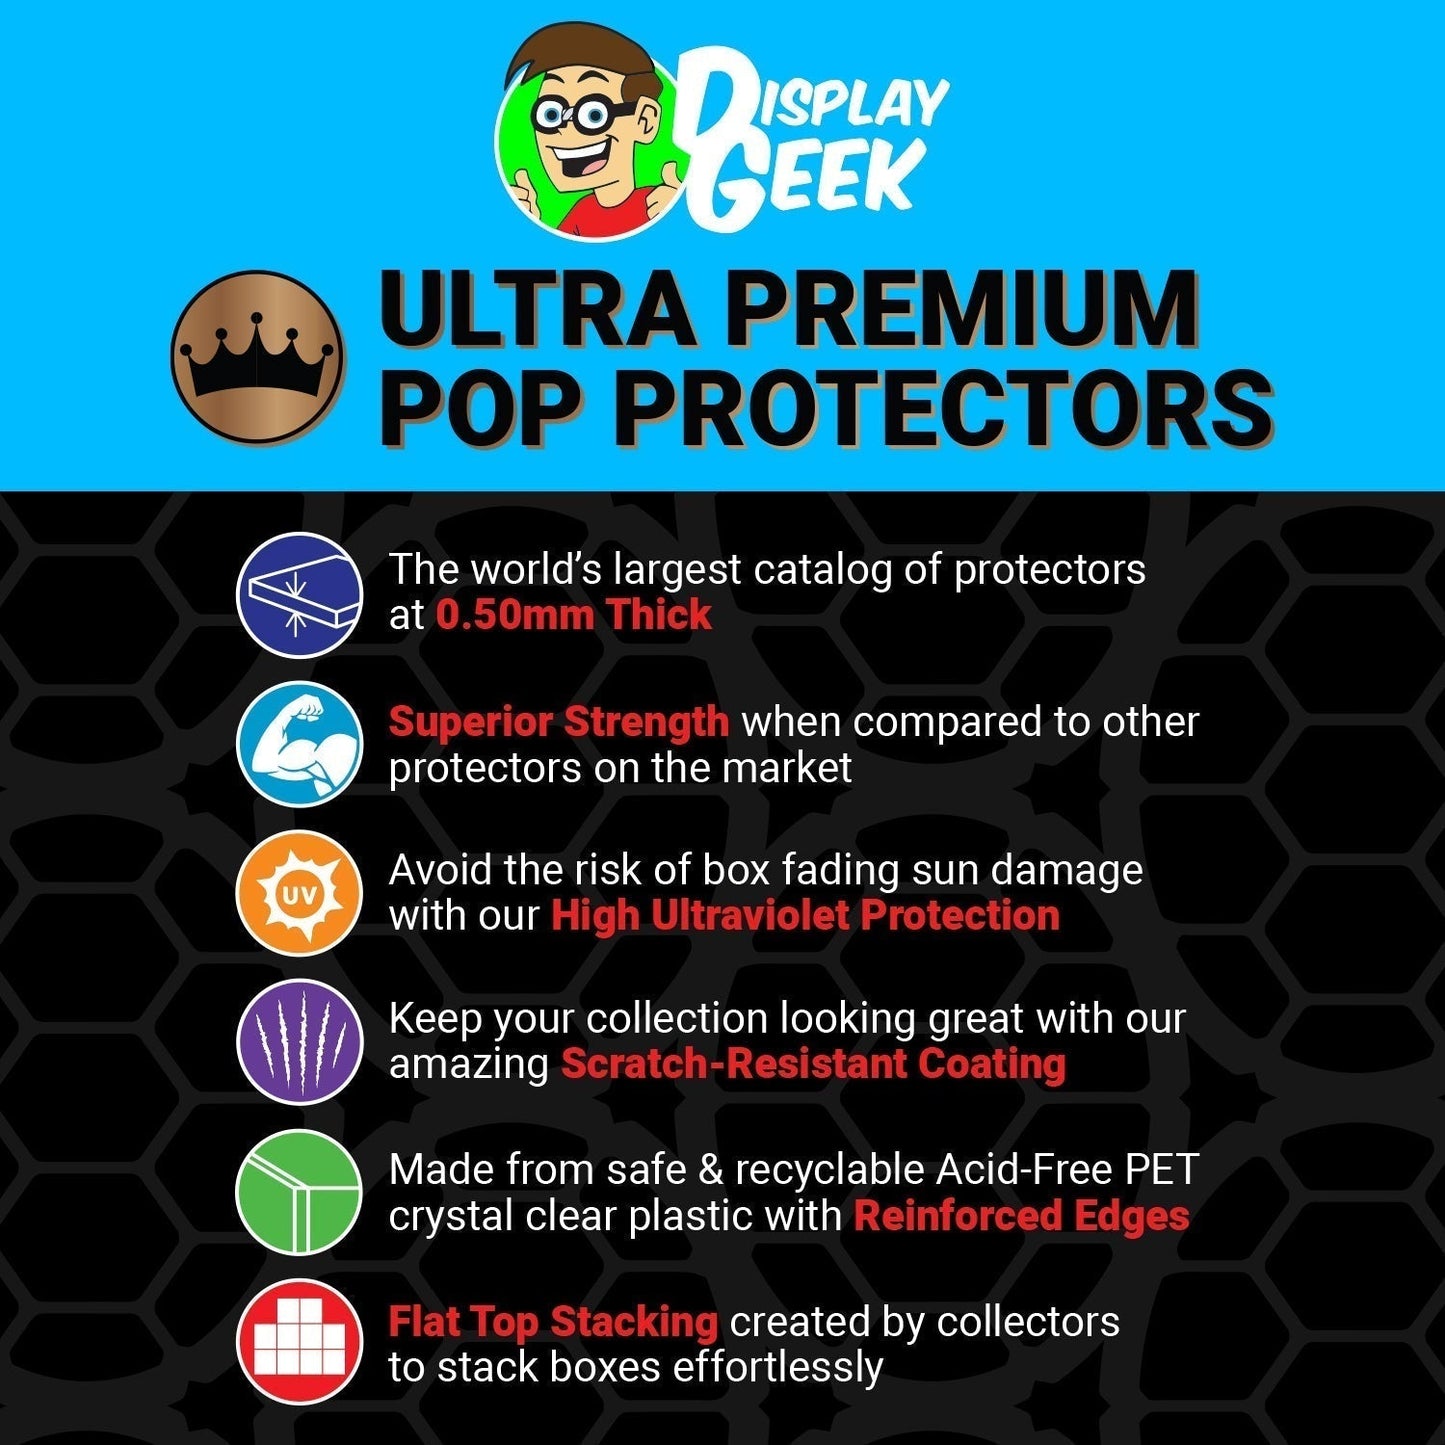 Pop Protector for Funkoverse Harry Potter 100 Funko 2 Pack - PPG Pop Protector Guide Search Created by Display Geek